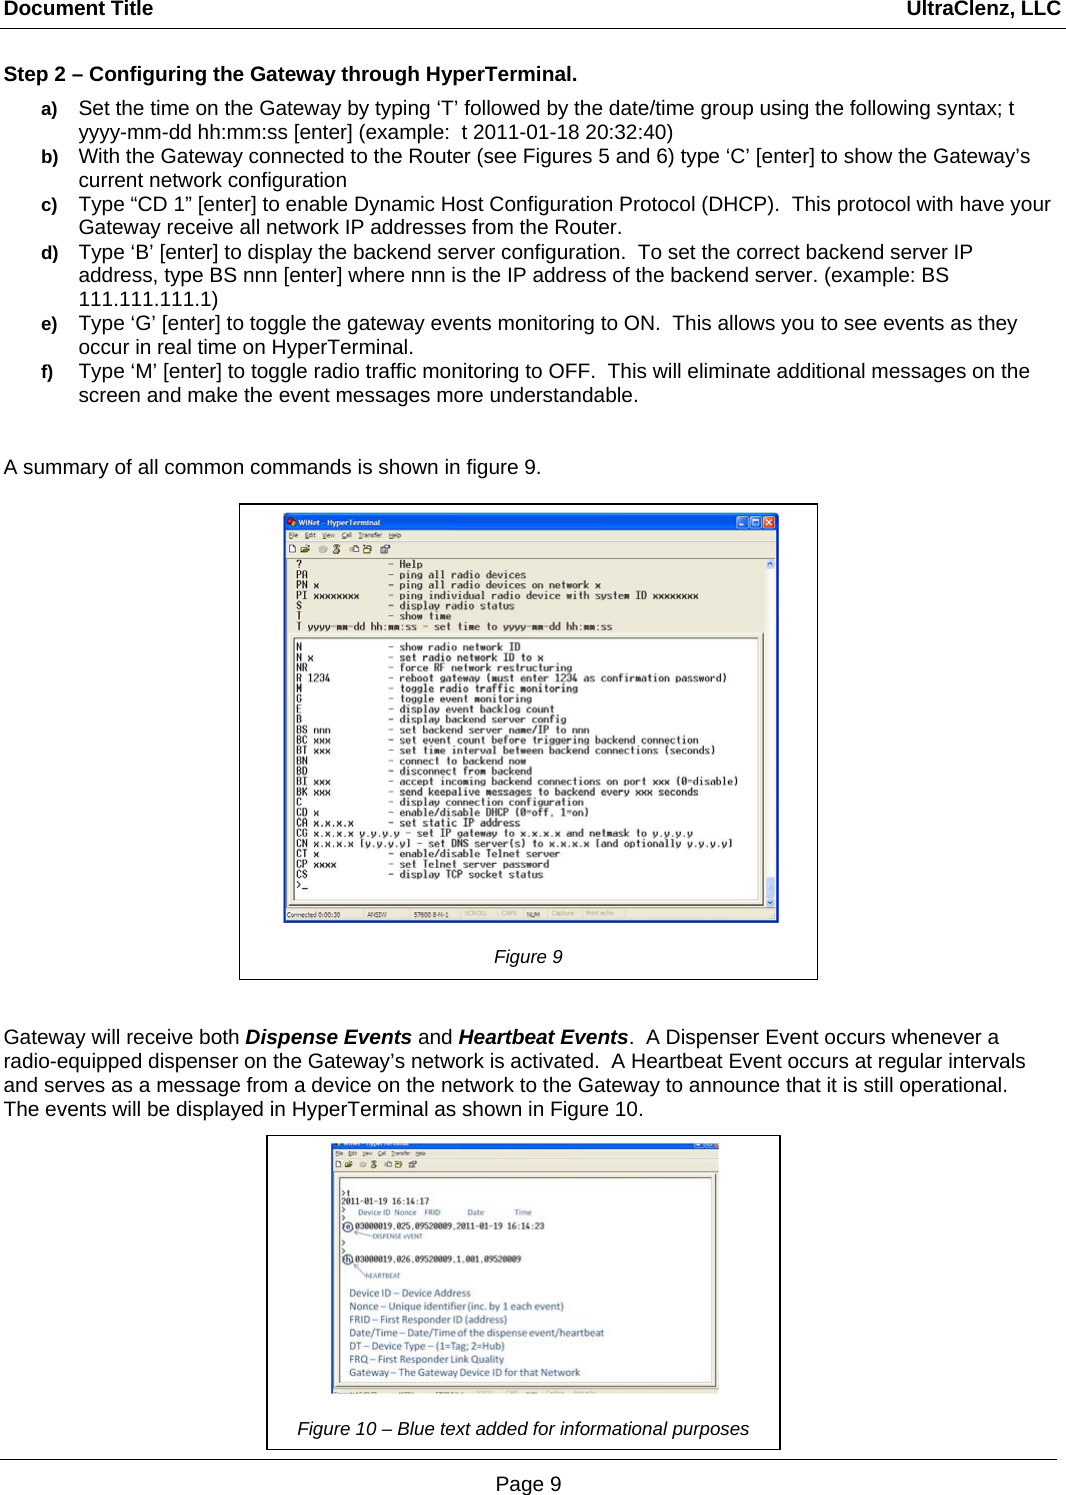 Document Title                                                                                                                                  UltraClenz, LLC Page 9 Step 2 – Configuring the Gateway through HyperTerminal. a)  Set the time on the Gateway by typing ‘T’ followed by the date/time group using the following syntax; t yyyy-mm-dd hh:mm:ss [enter] (example:  t 2011-01-18 20:32:40) b)  With the Gateway connected to the Router (see Figures 5 and 6) type ‘C’ [enter] to show the Gateway’s current network configuration c)  Type “CD 1” [enter] to enable Dynamic Host Configuration Protocol (DHCP).  This protocol with have your Gateway receive all network IP addresses from the Router. d)  Type ‘B’ [enter] to display the backend server configuration.  To set the correct backend server IP address, type BS nnn [enter] where nnn is the IP address of the backend server. (example: BS 111.111.111.1) e)  Type ‘G’ [enter] to toggle the gateway events monitoring to ON.  This allows you to see events as they occur in real time on HyperTerminal. f)  Type ‘M’ [enter] to toggle radio traffic monitoring to OFF.  This will eliminate additional messages on the screen and make the event messages more understandable.   A summary of all common commands is shown in figure 9.           Gateway will receive both Dispense Events and Heartbeat Events.  A Dispenser Event occurs whenever a radio-equipped dispenser on the Gateway’s network is activated.  A Heartbeat Event occurs at regular intervals and serves as a message from a device on the network to the Gateway to announce that it is still operational.  The events will be displayed in HyperTerminal as shown in Figure 10.         Figure 9   Figure 10 – Blue text added for informational purposes 